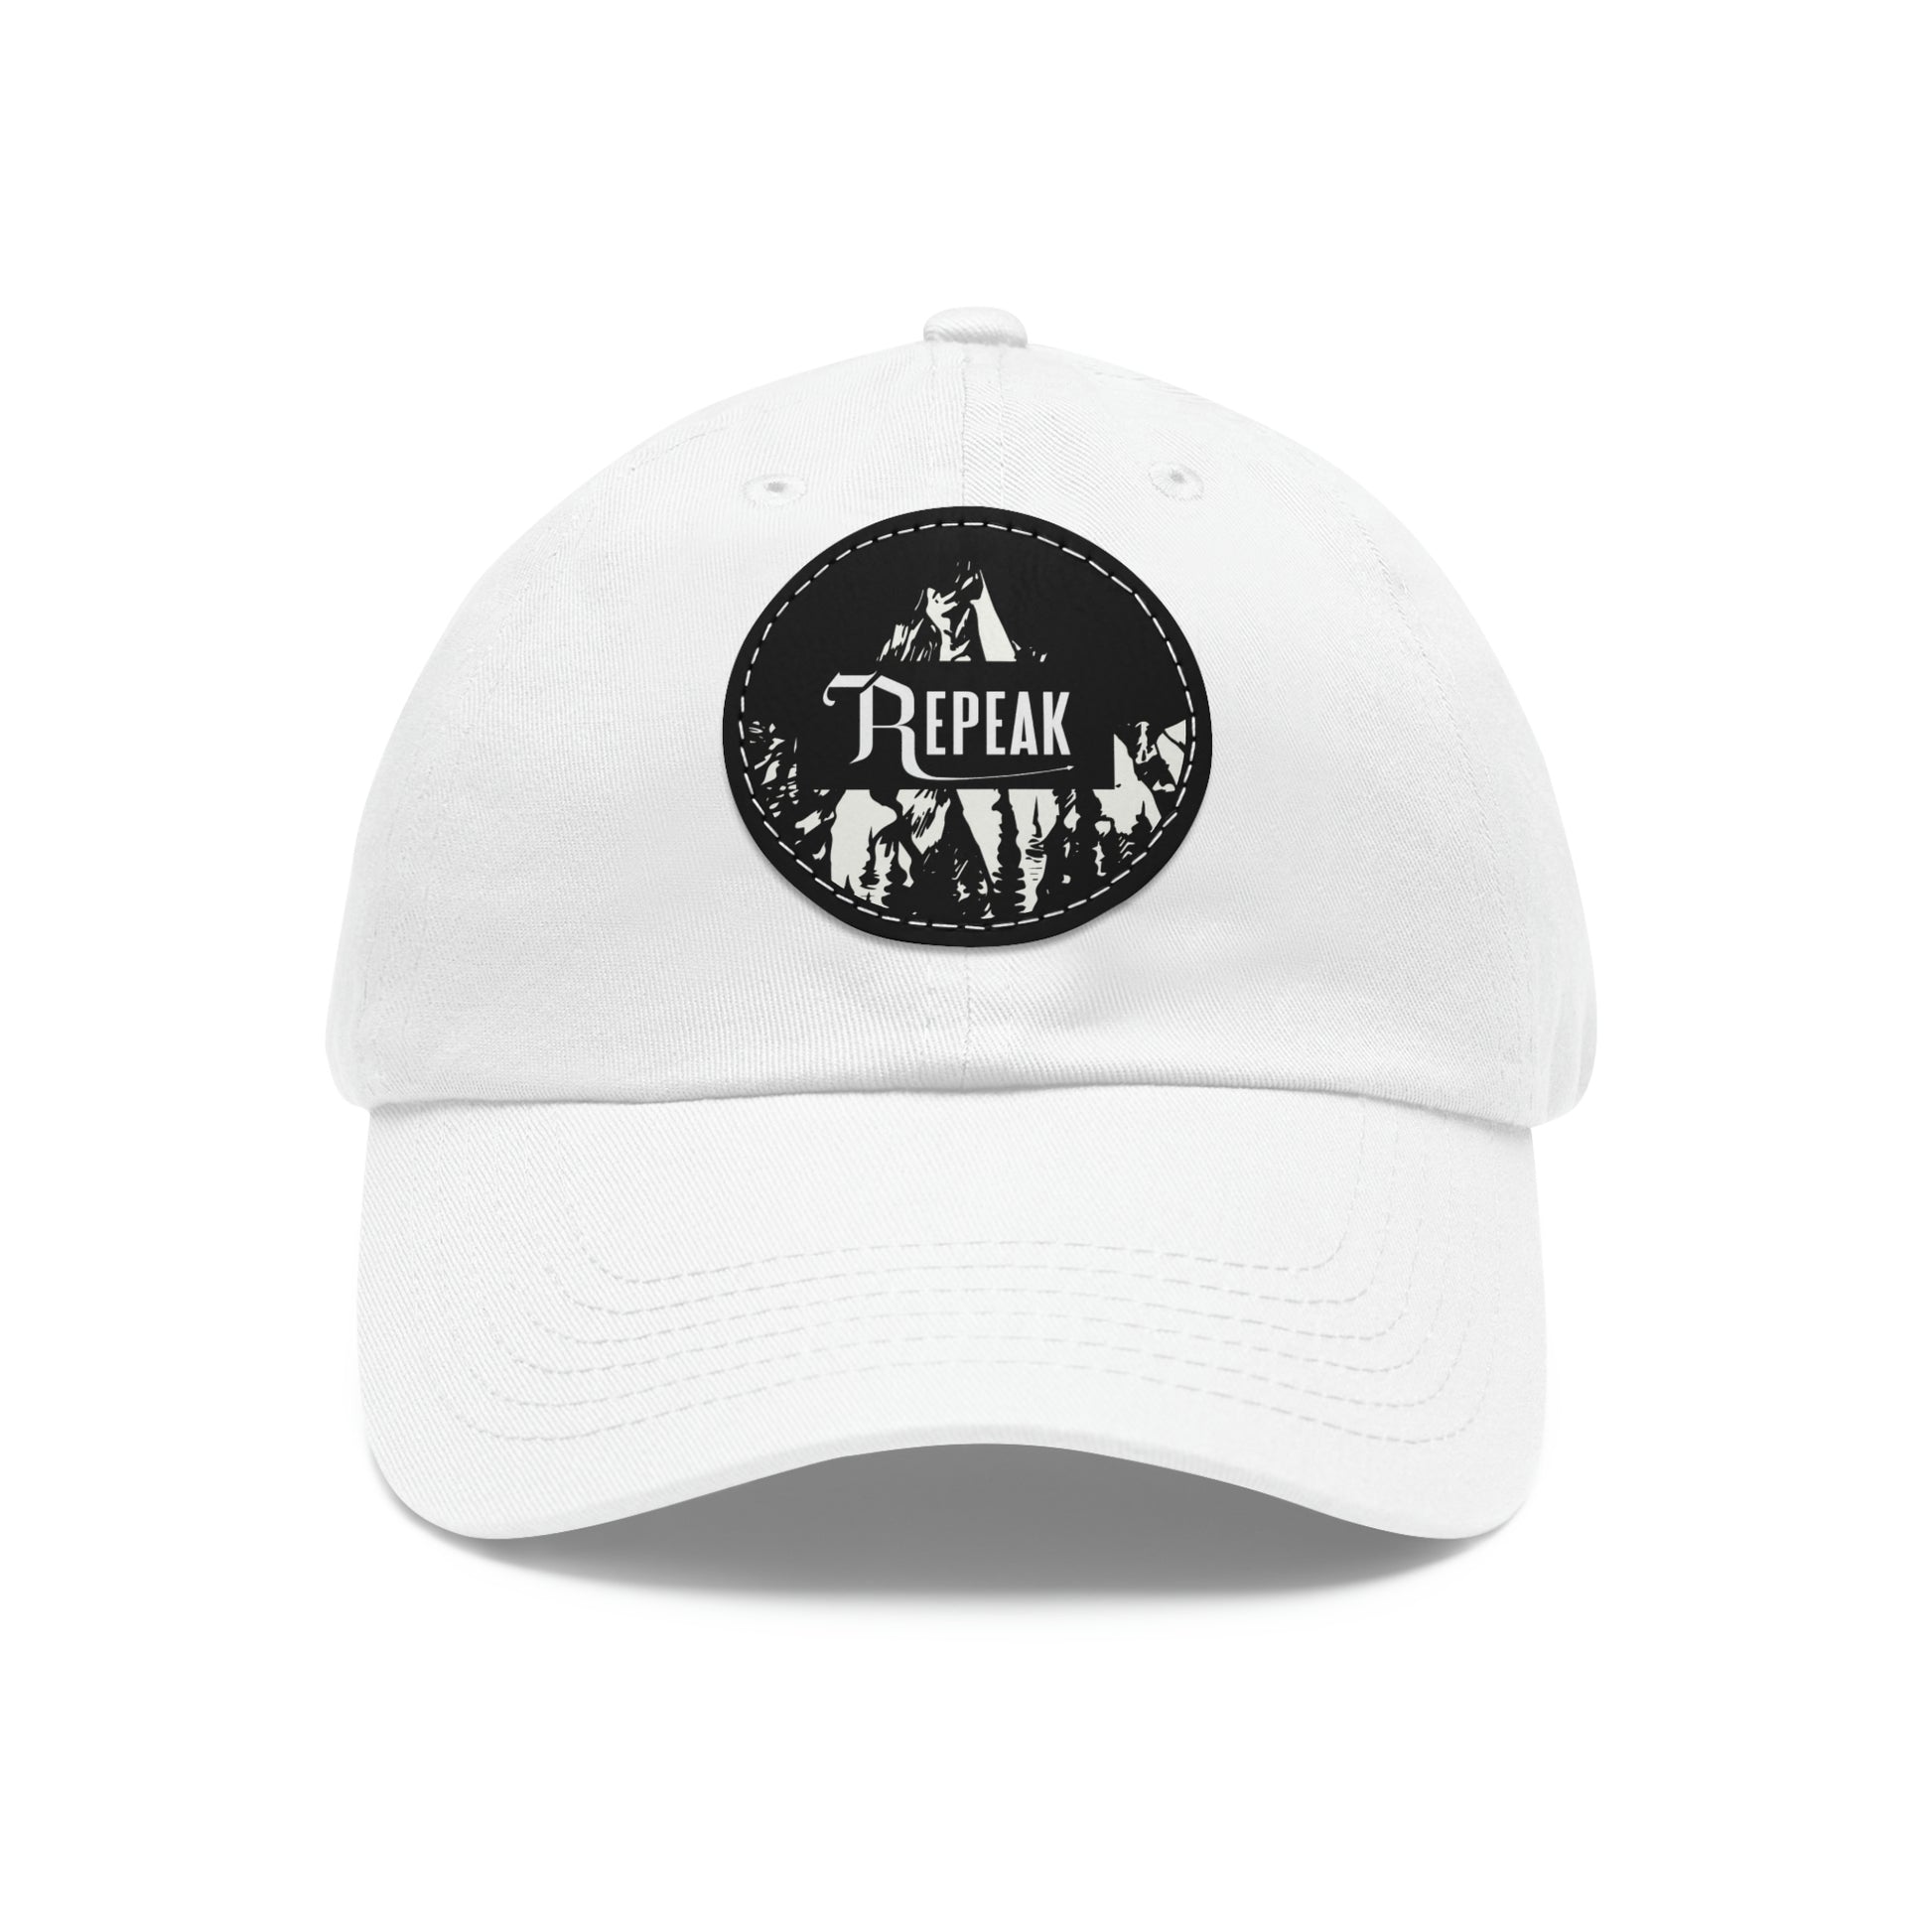 repeak energy dad hat, black and white, front side